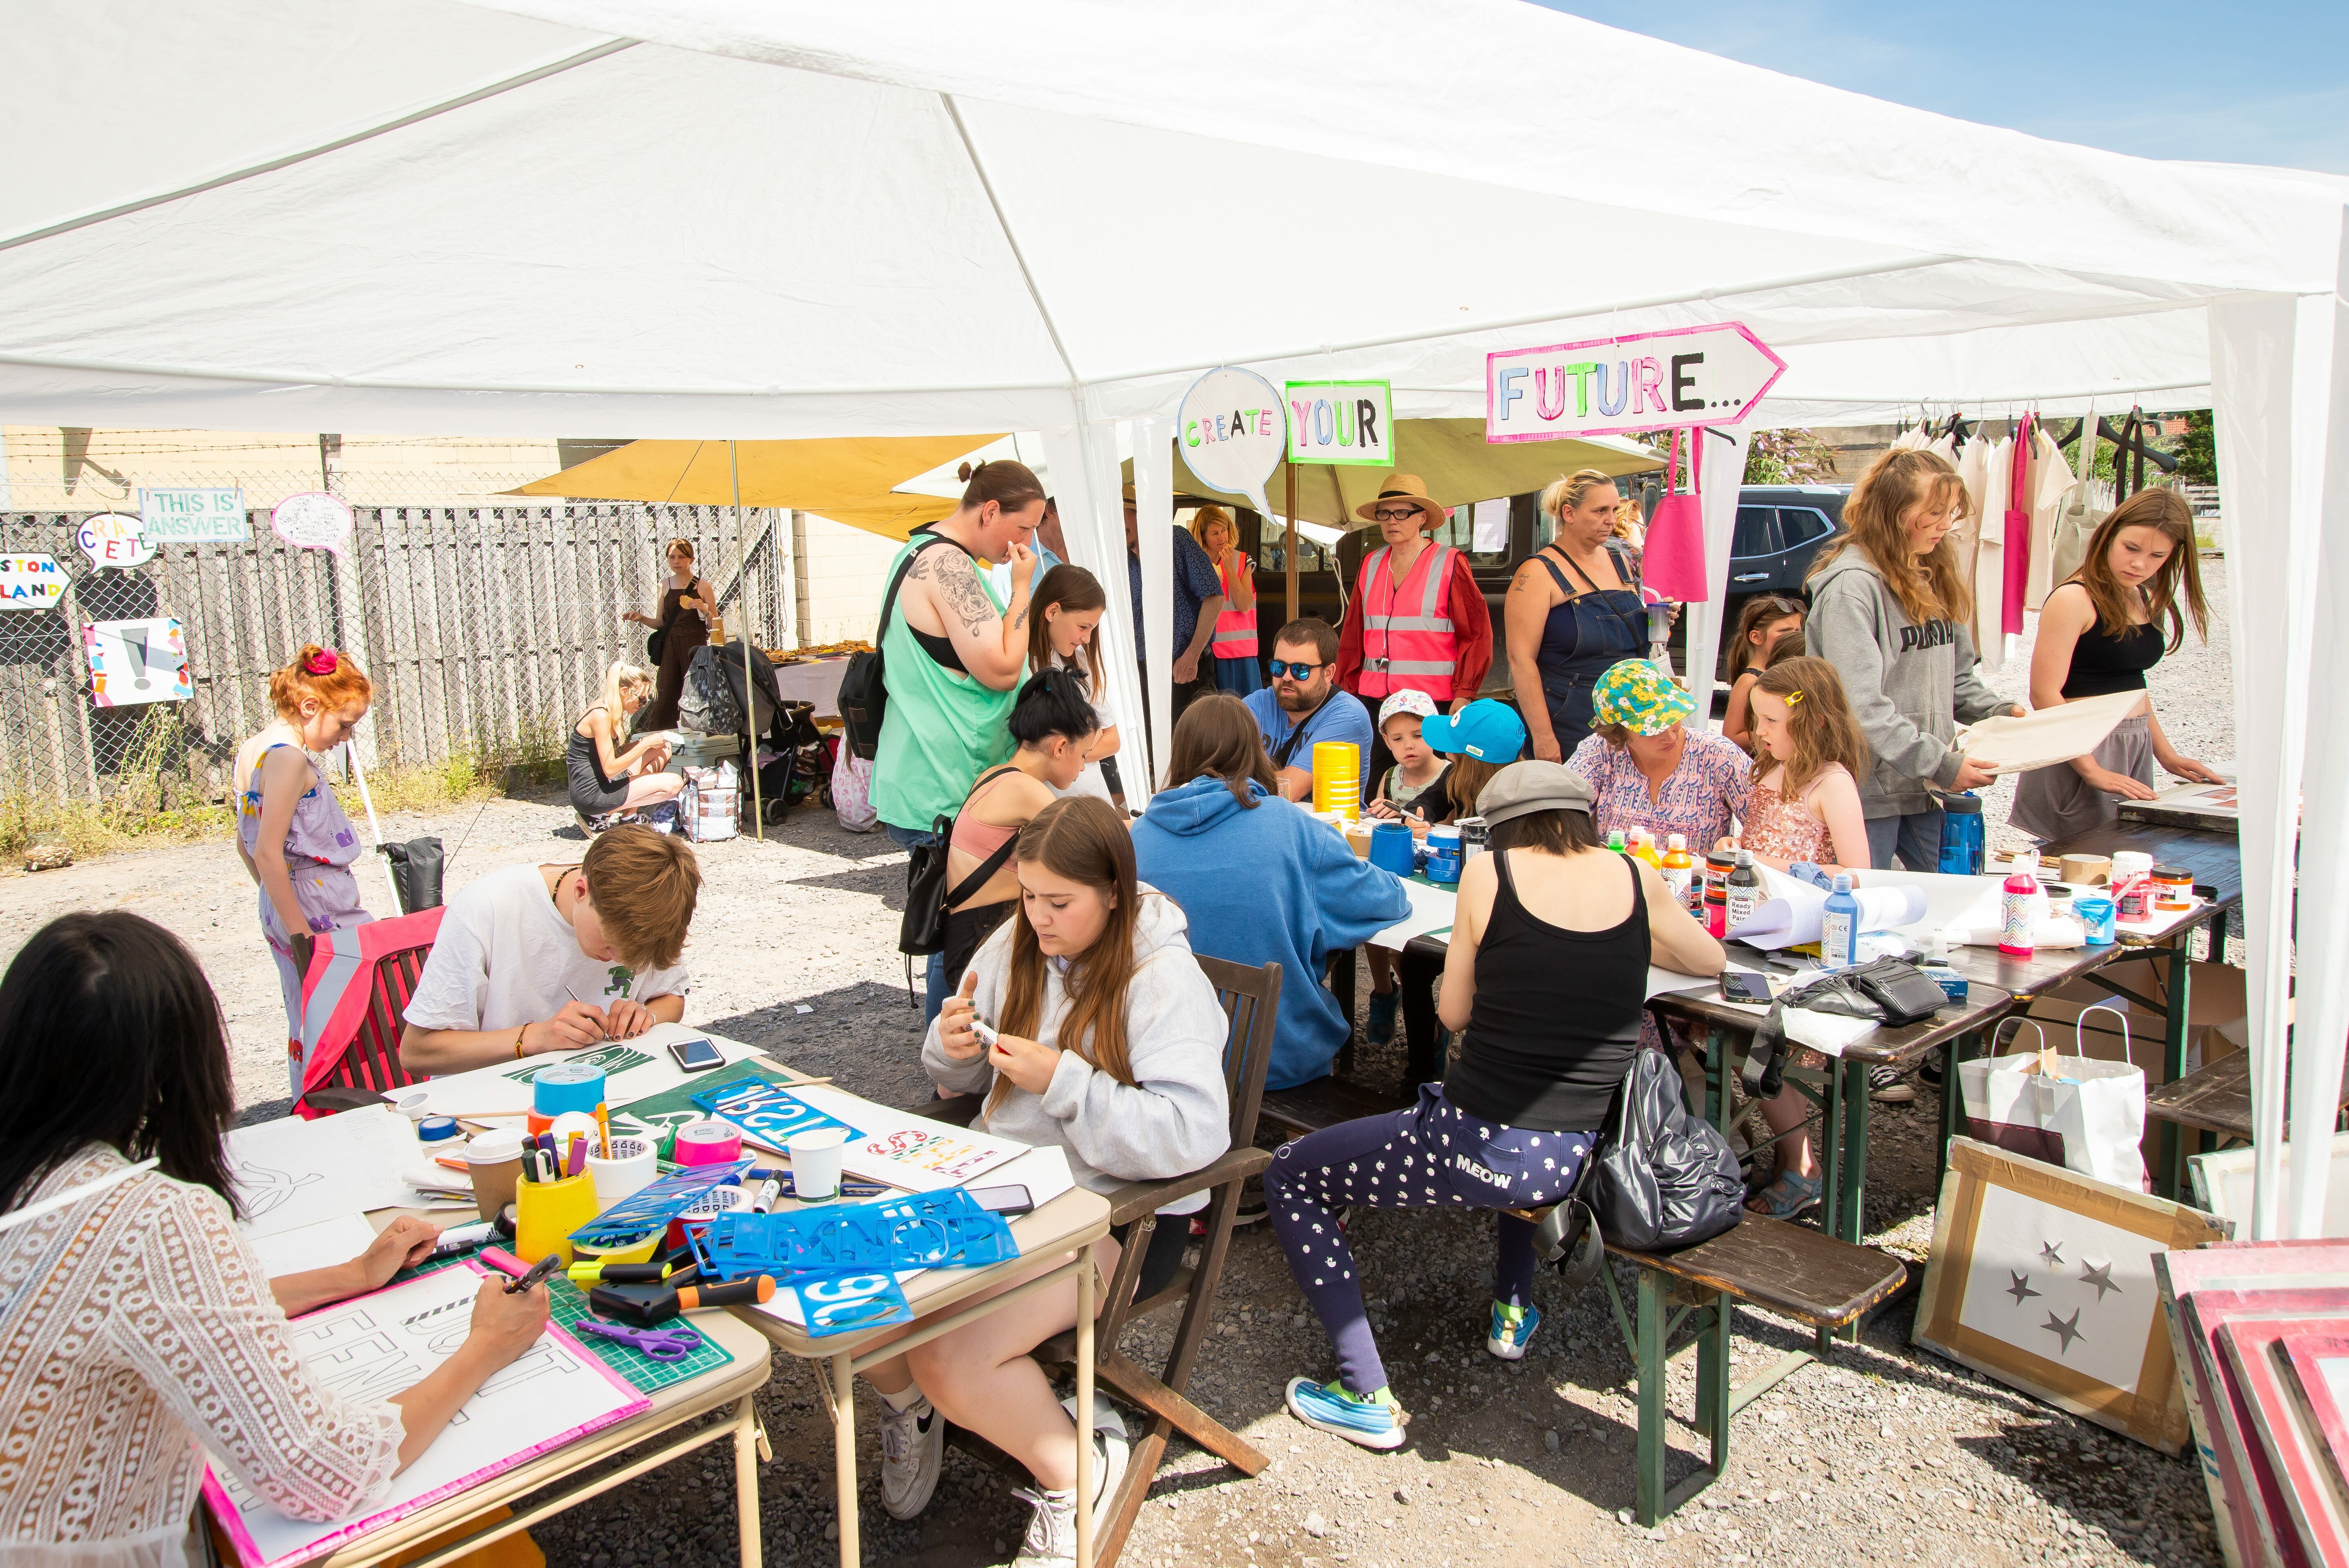 Several individuals seated beneath a white tent, engaged in drawing, colouring and stencilling. There are handmade signs in the background that say 'Create', 'your' and 'future'.